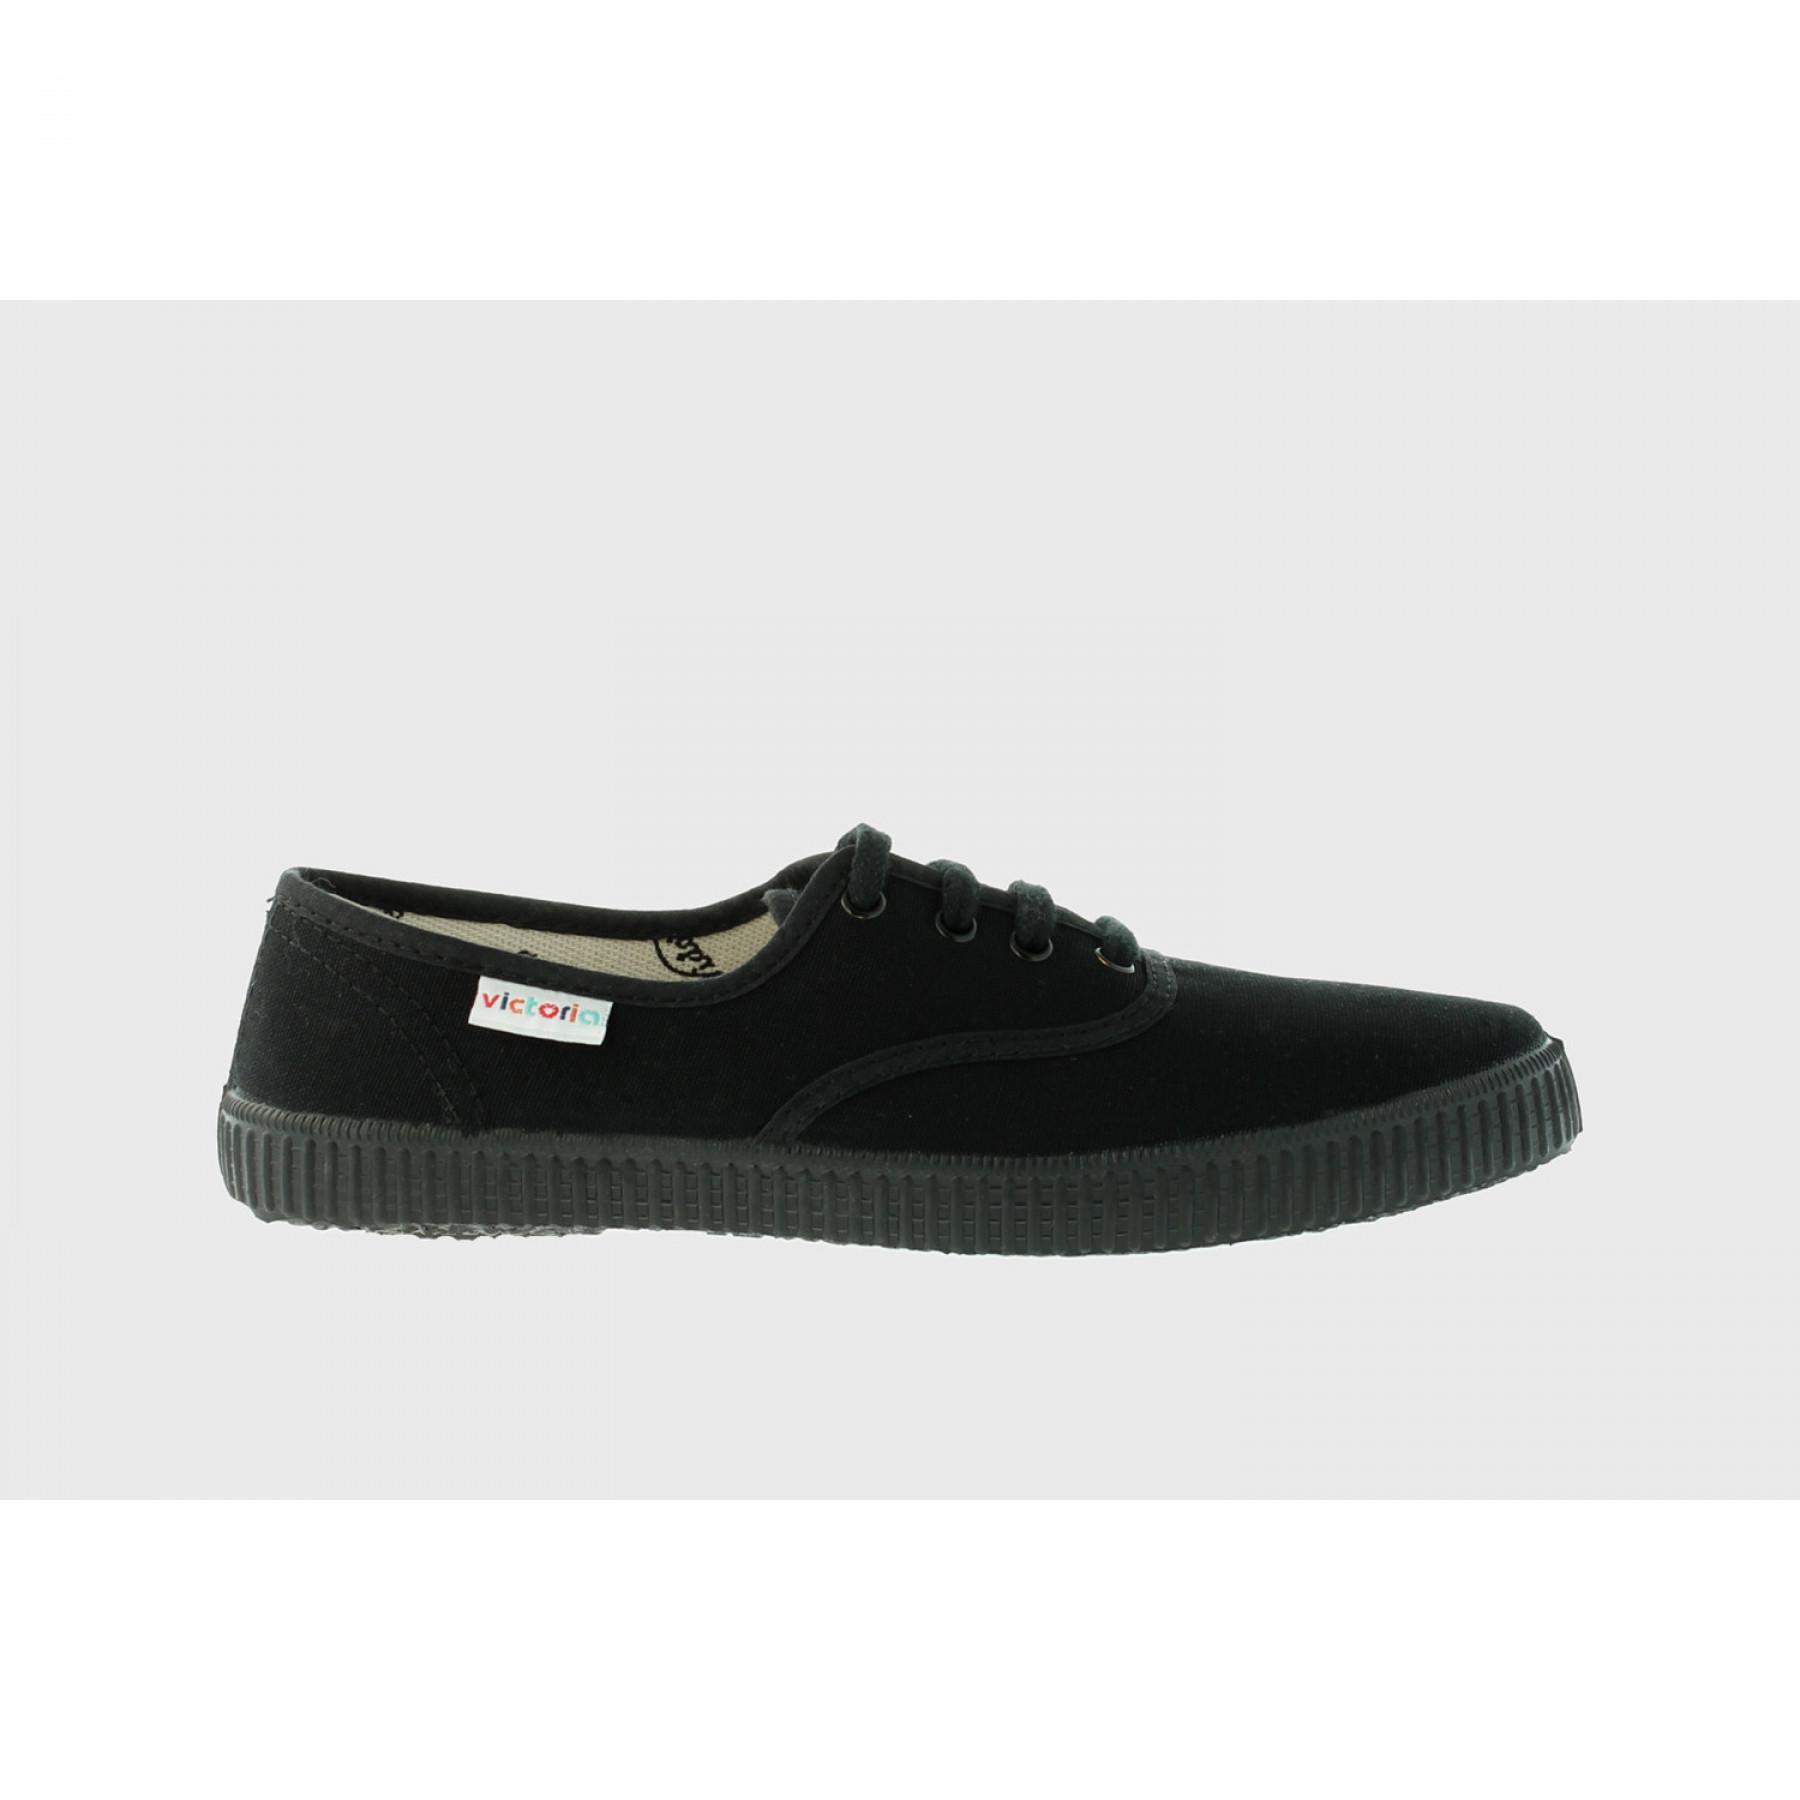 Sneakers Victoria 1915 anglaise total black